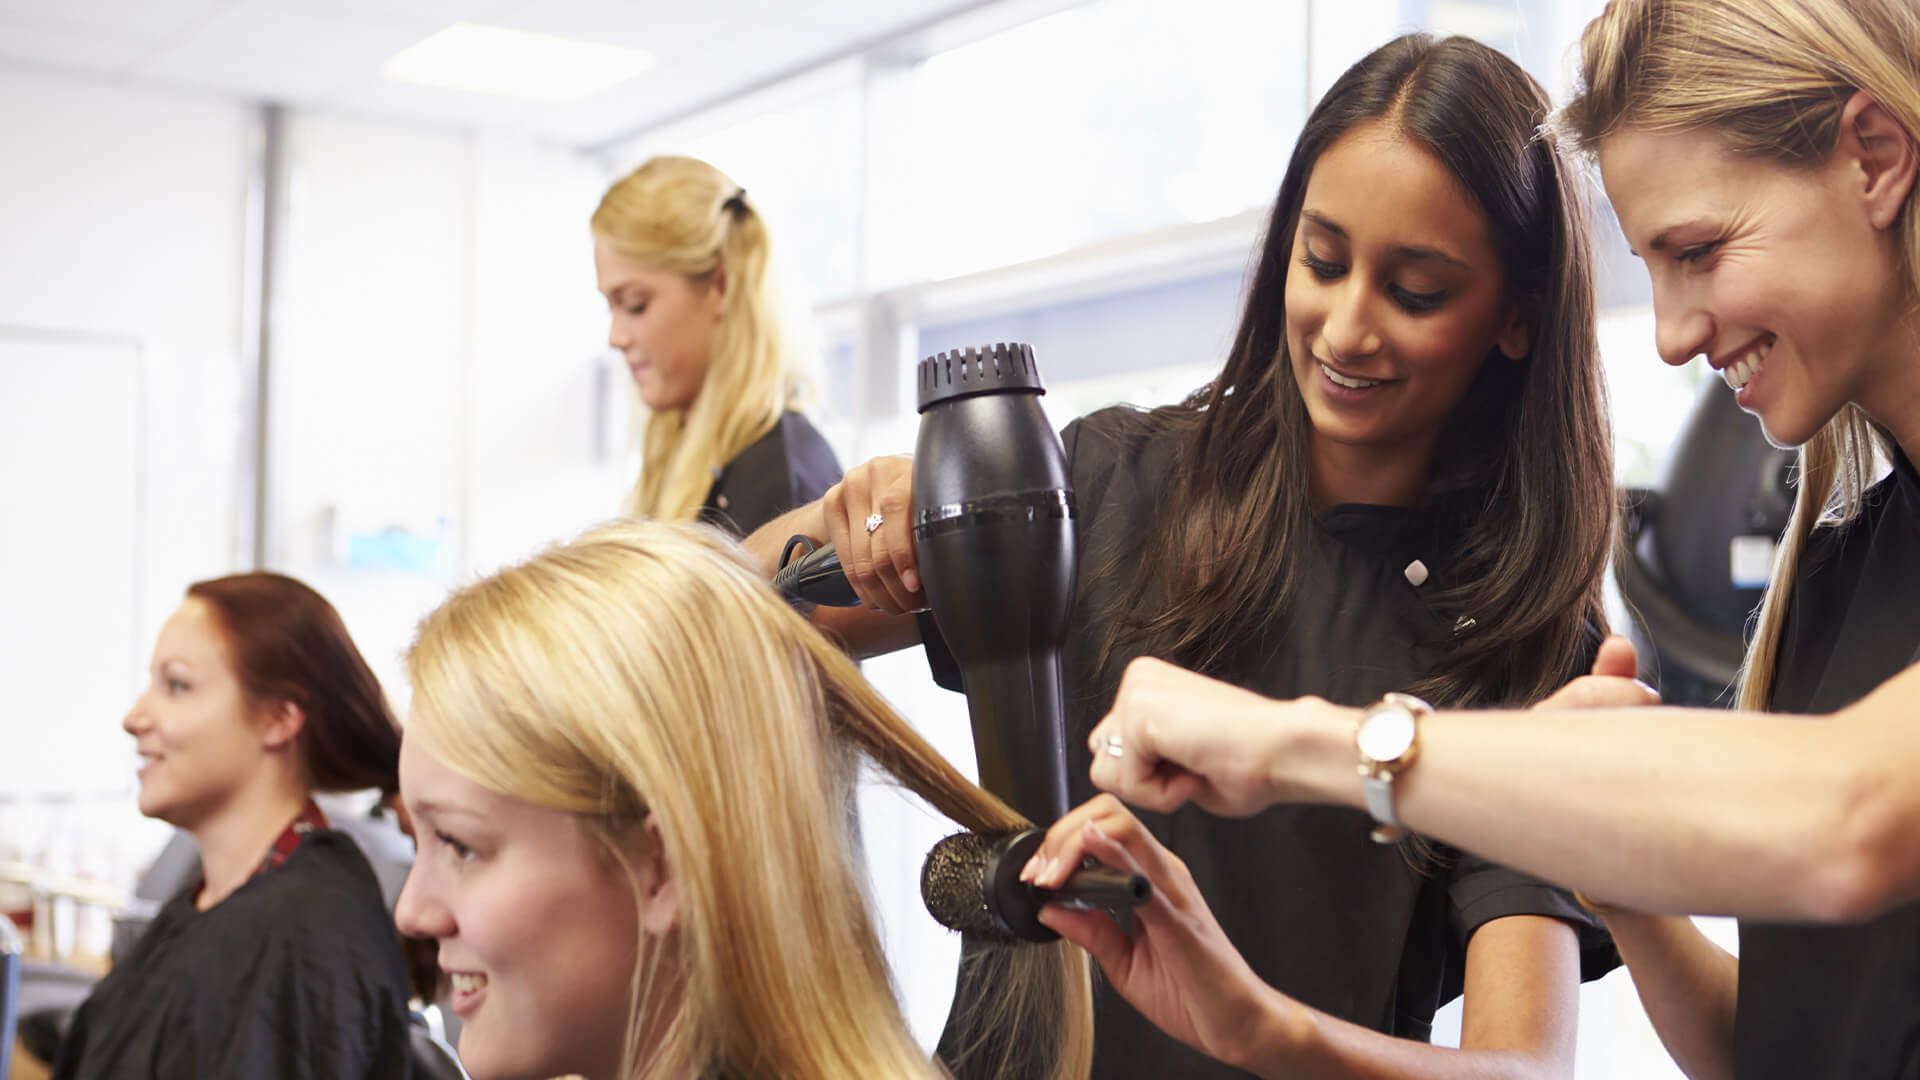 Women doing a female clients hair, with a round hair brush and a hair dryer